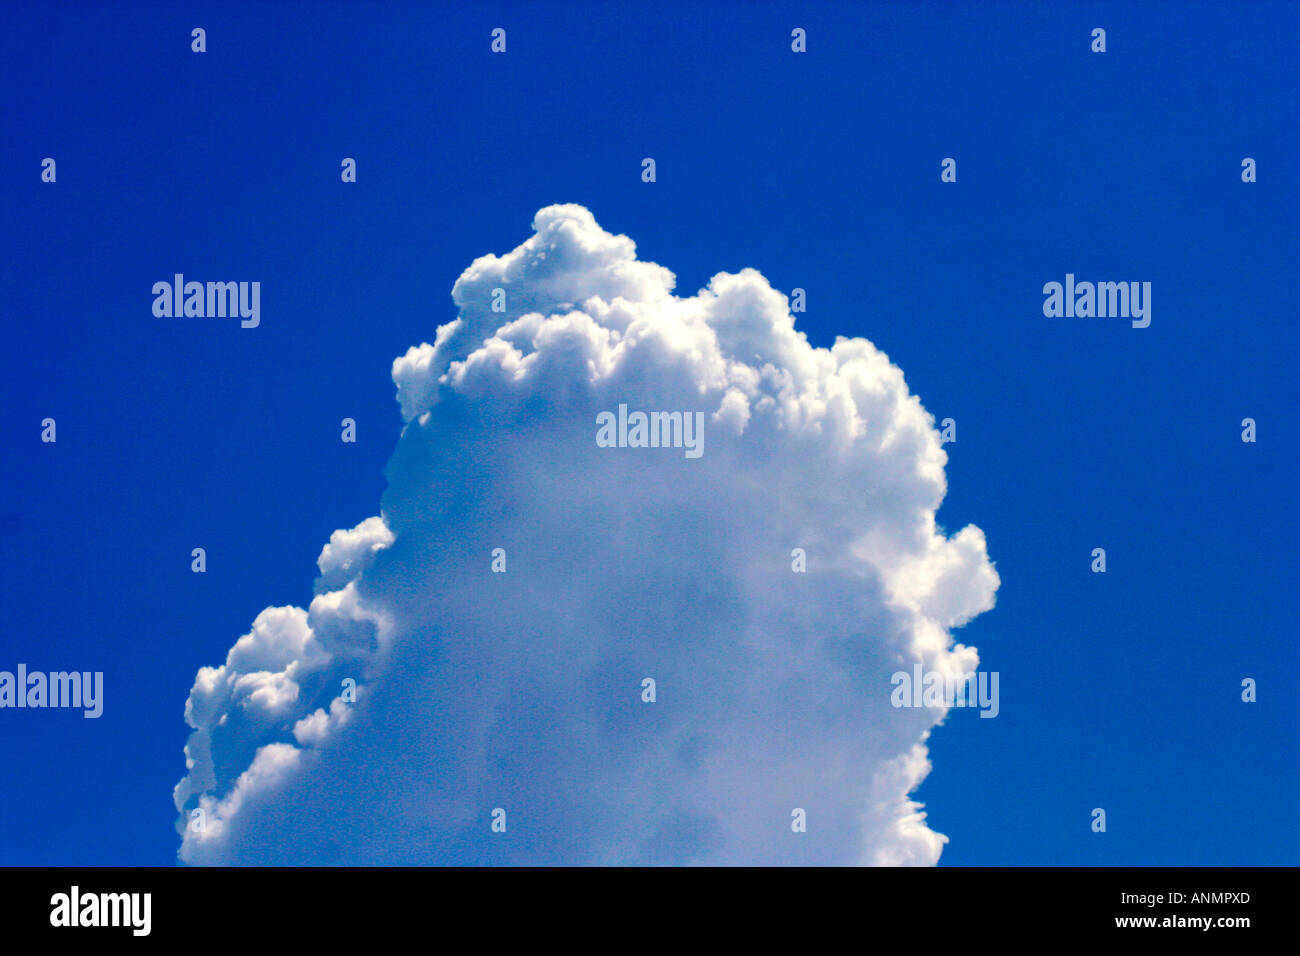 A deep blue sky with a patch of fluffy white cloud Stock Photo